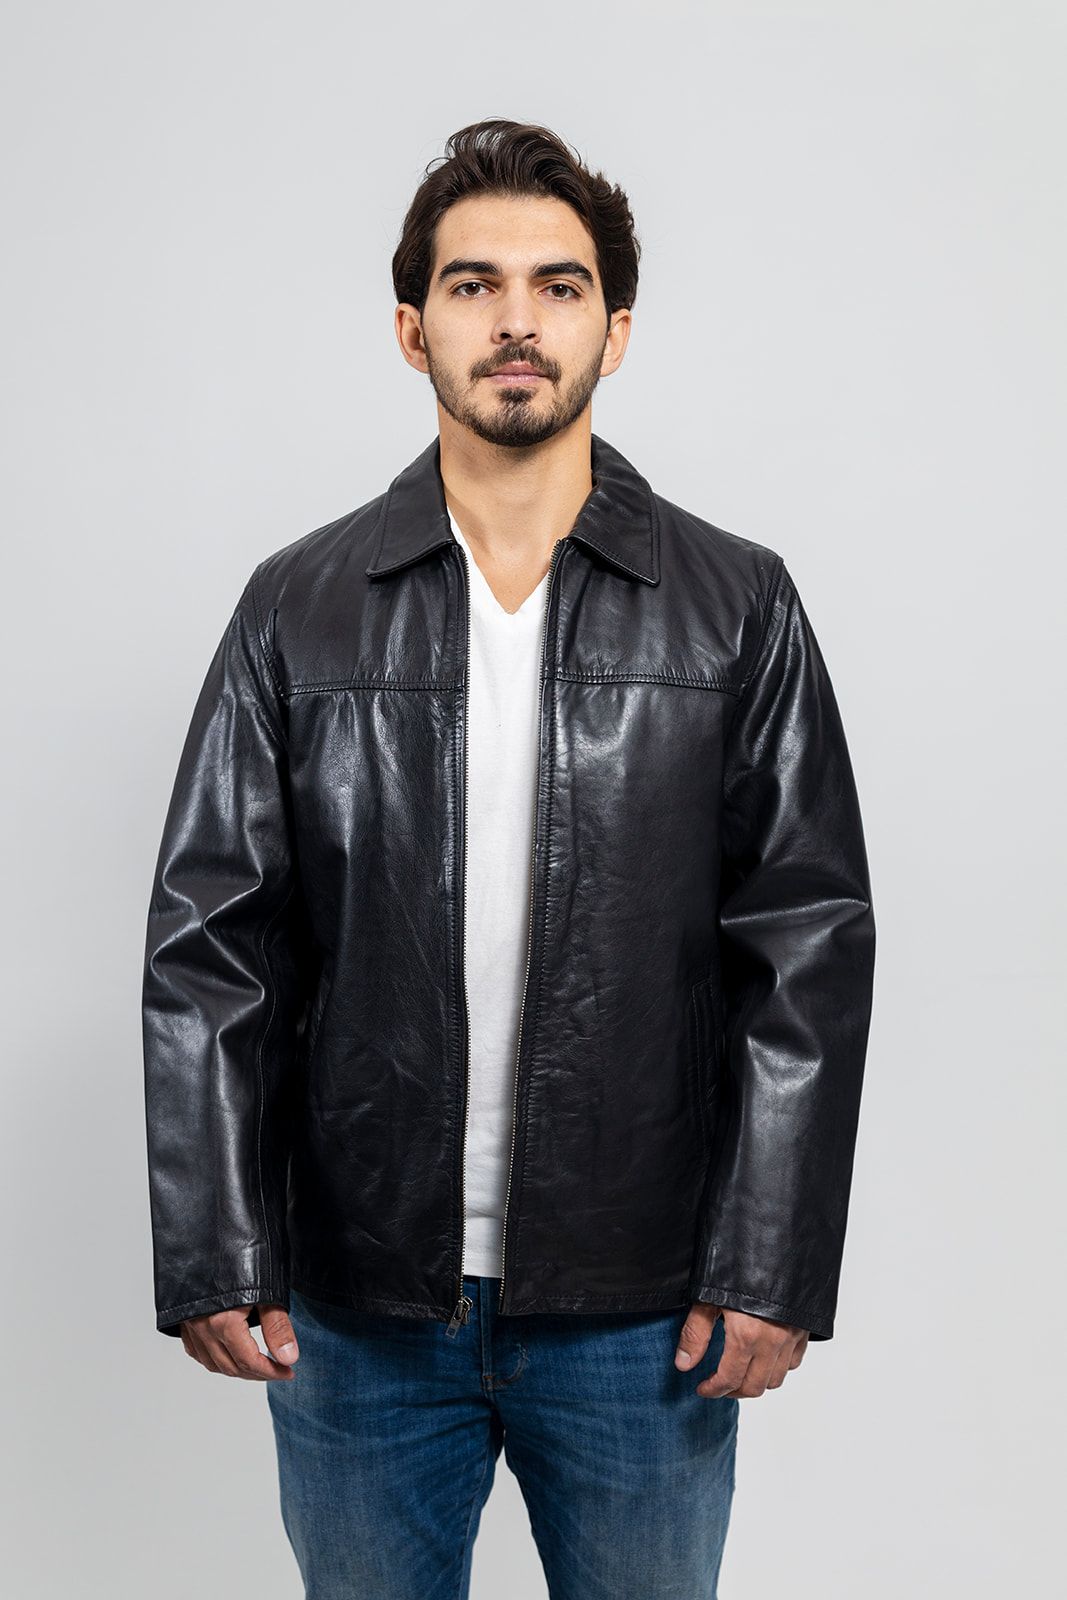 This fashion leather men's jacket from Whet Blu is a wardrobe staple. A sleek and simple zipped blazer with folded collar perfect for a casual day or an evening out. Naked cowhide leather. Classic fit. Full zip out liner. Two hand pockets. Clean by leather specialist. Lifetime Warranty on Hardware. Available in black and whiskey. Sizes S-5X. Online only. lifestyle front view